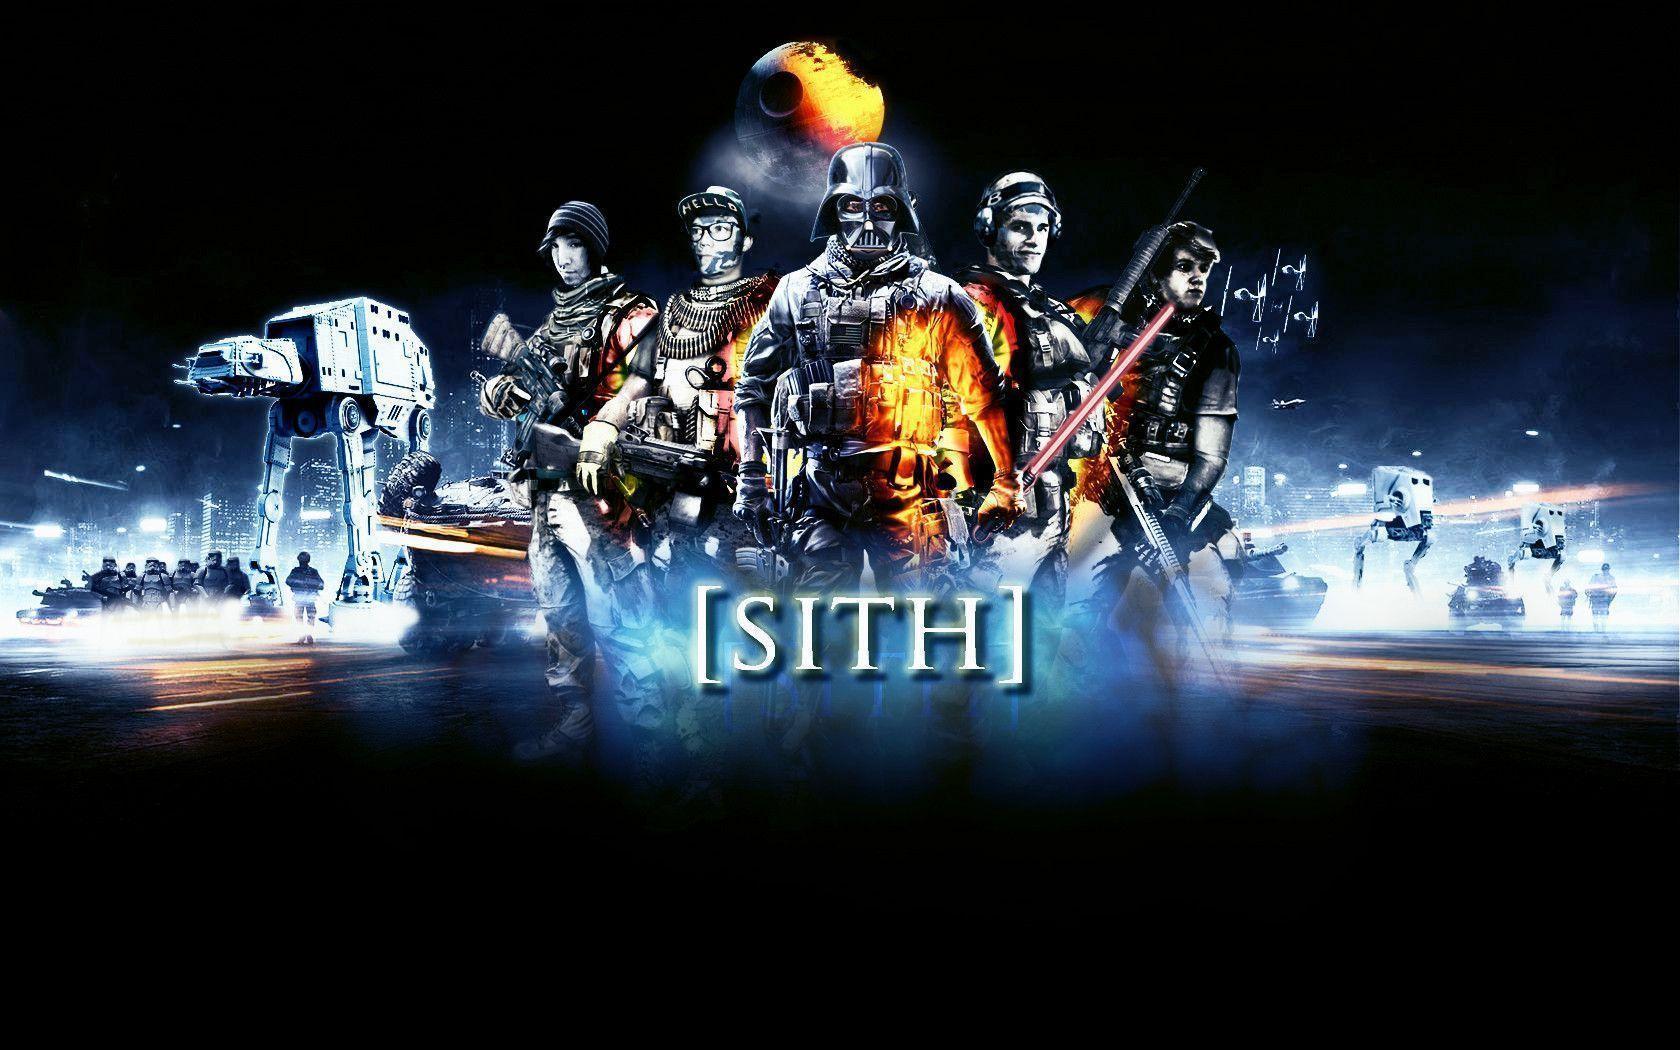 image For > Sith Order Wallpaper